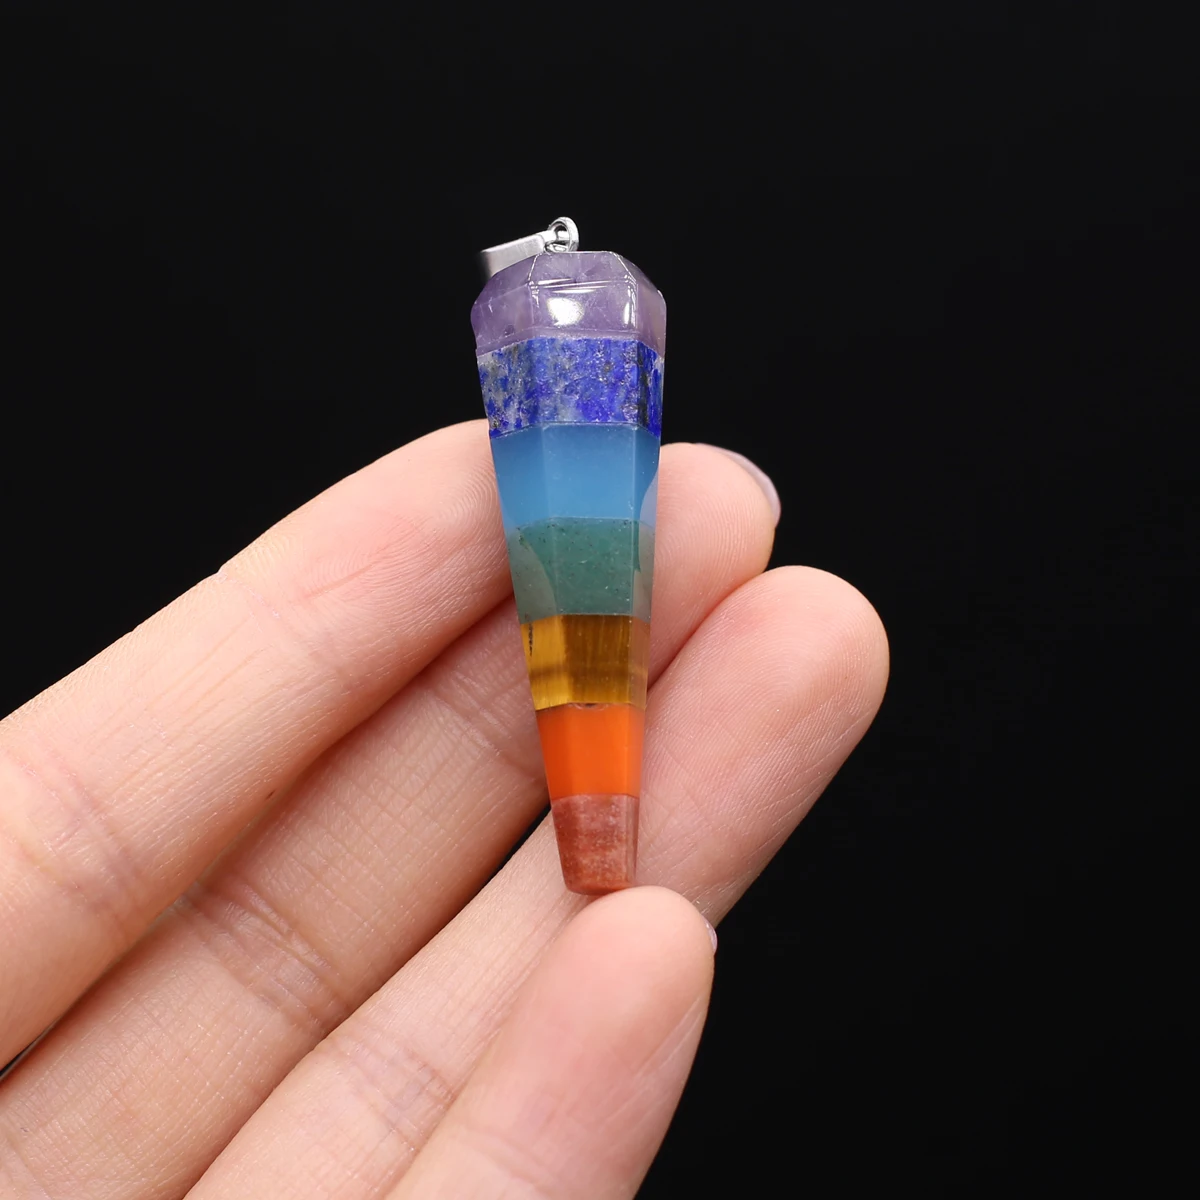 

1pcs Natural Stone Pendant Striped Agate Carrot Seven Chakra Craft Jewelry Making DIY Necklace Earring Accessories Charm Gift